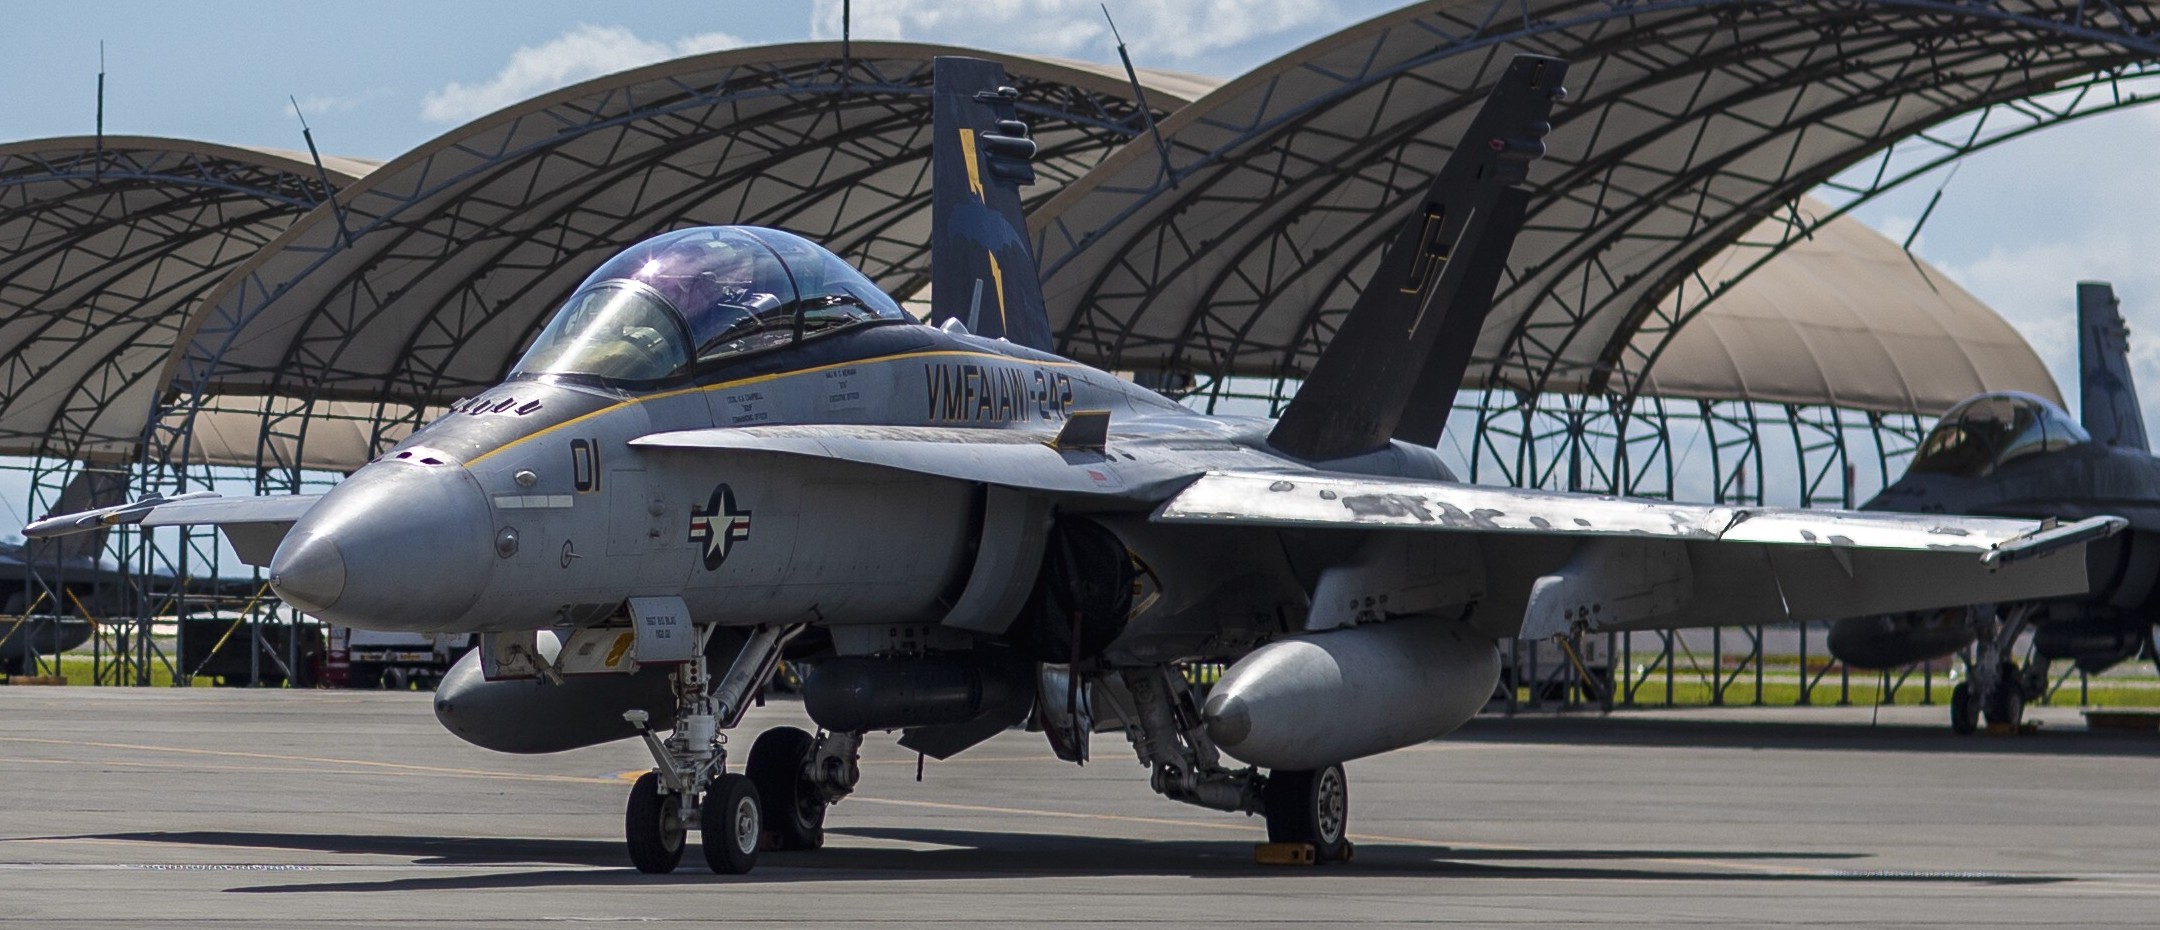 vmfa(aw)-242 bats marine all-weather fighter attack squadron usmc f/a-18d hornet 88 mcas iwakuni japan